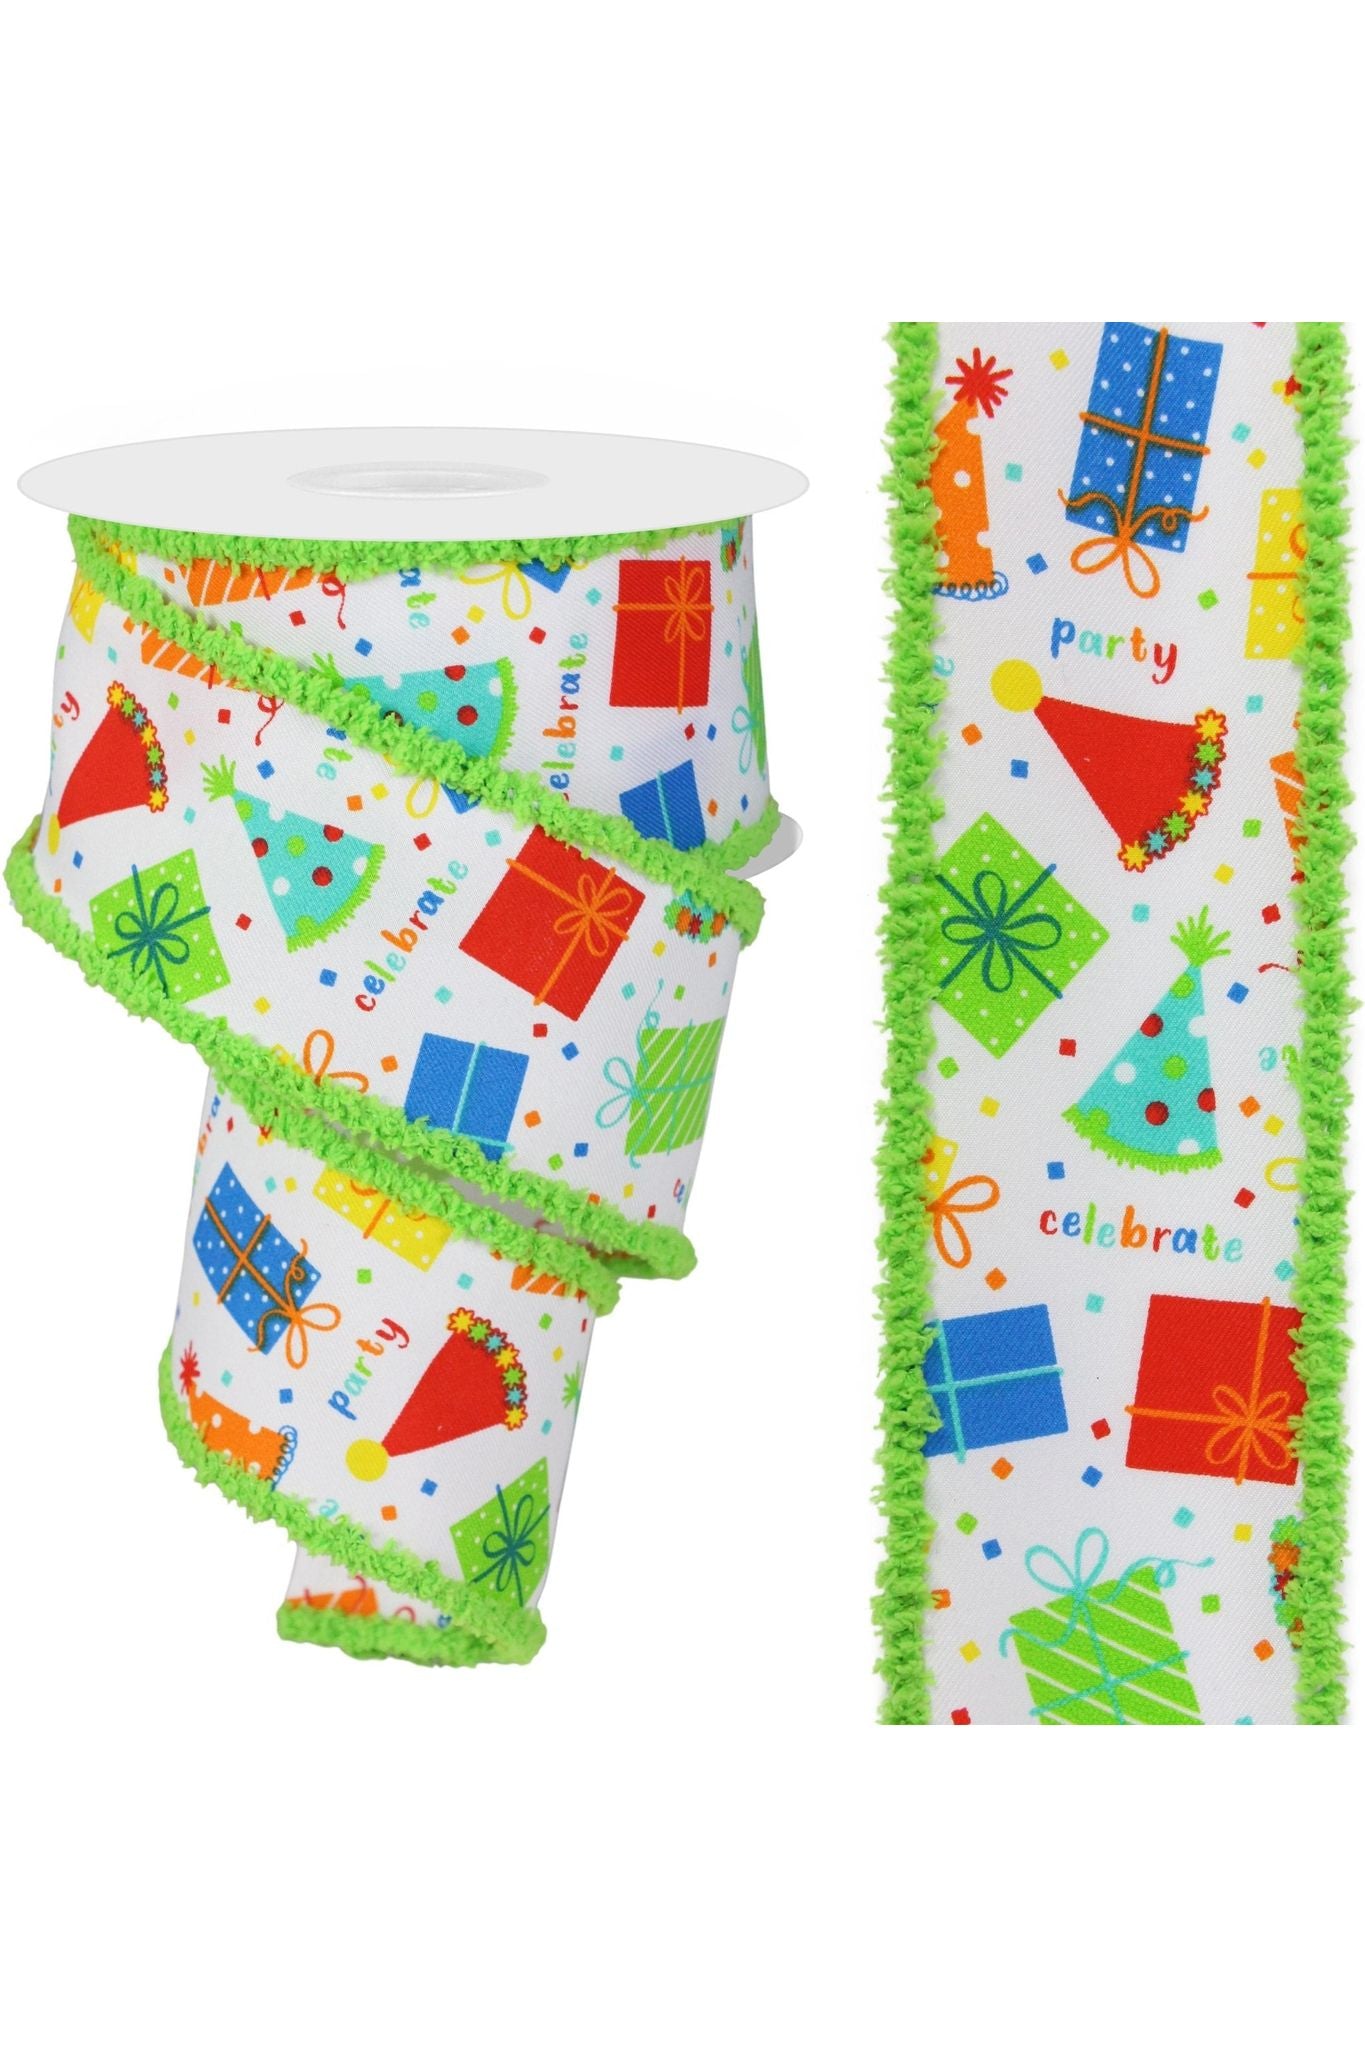 Shop For 2.5" Birthday Party Gifts Ribbon: Primary Colors RGC802427